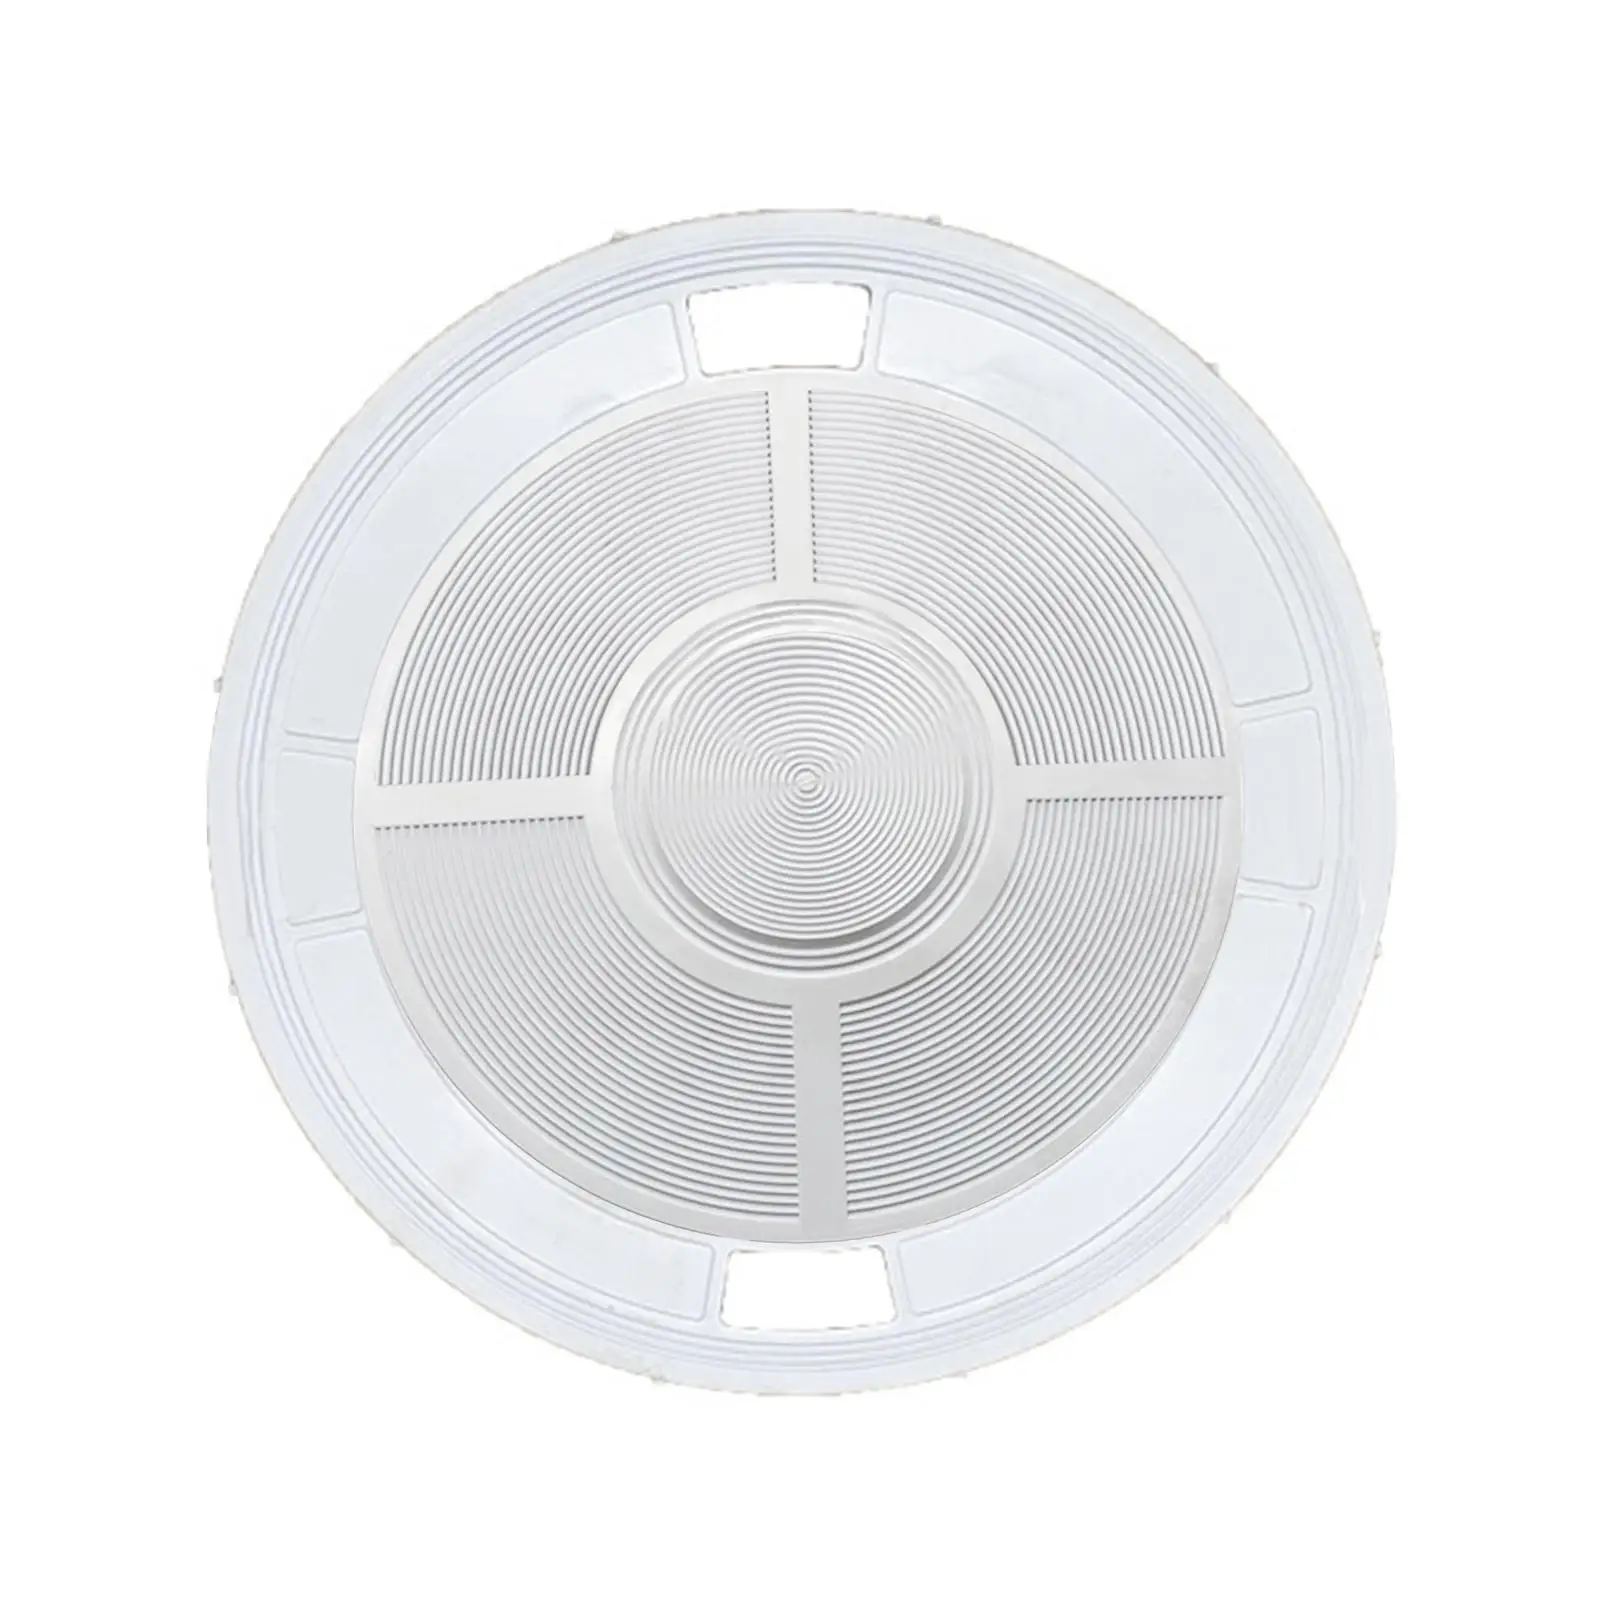 Pool Skimmer Lid Round Professional Spare Part 23.5cm Diameter Effective Durable Accessories Skimmer Cover for SP1091LX Skimmer